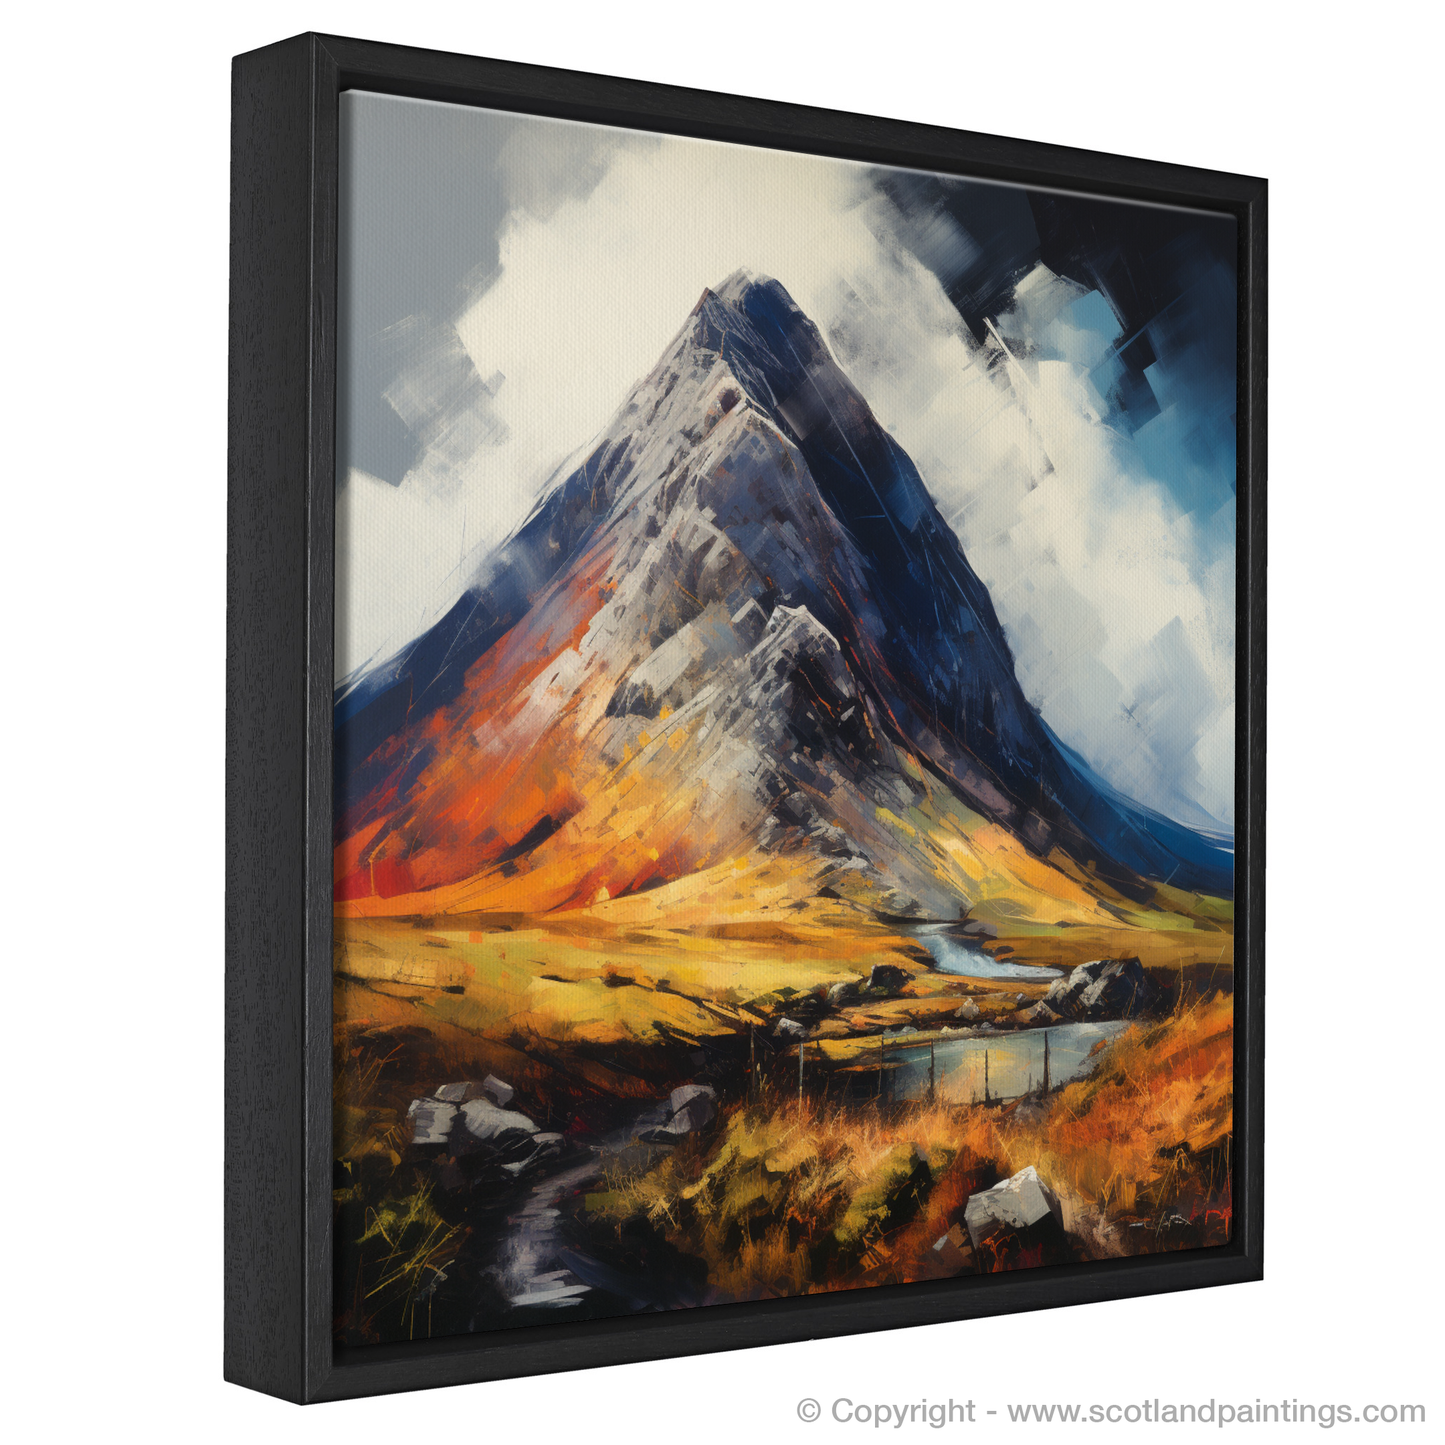 Painting and Art Print of Stob Dubh (Buachaille Etive Beag) entitled "Majestic Stob Dubh: An Expressionist Tribute to the Scottish Highlands".